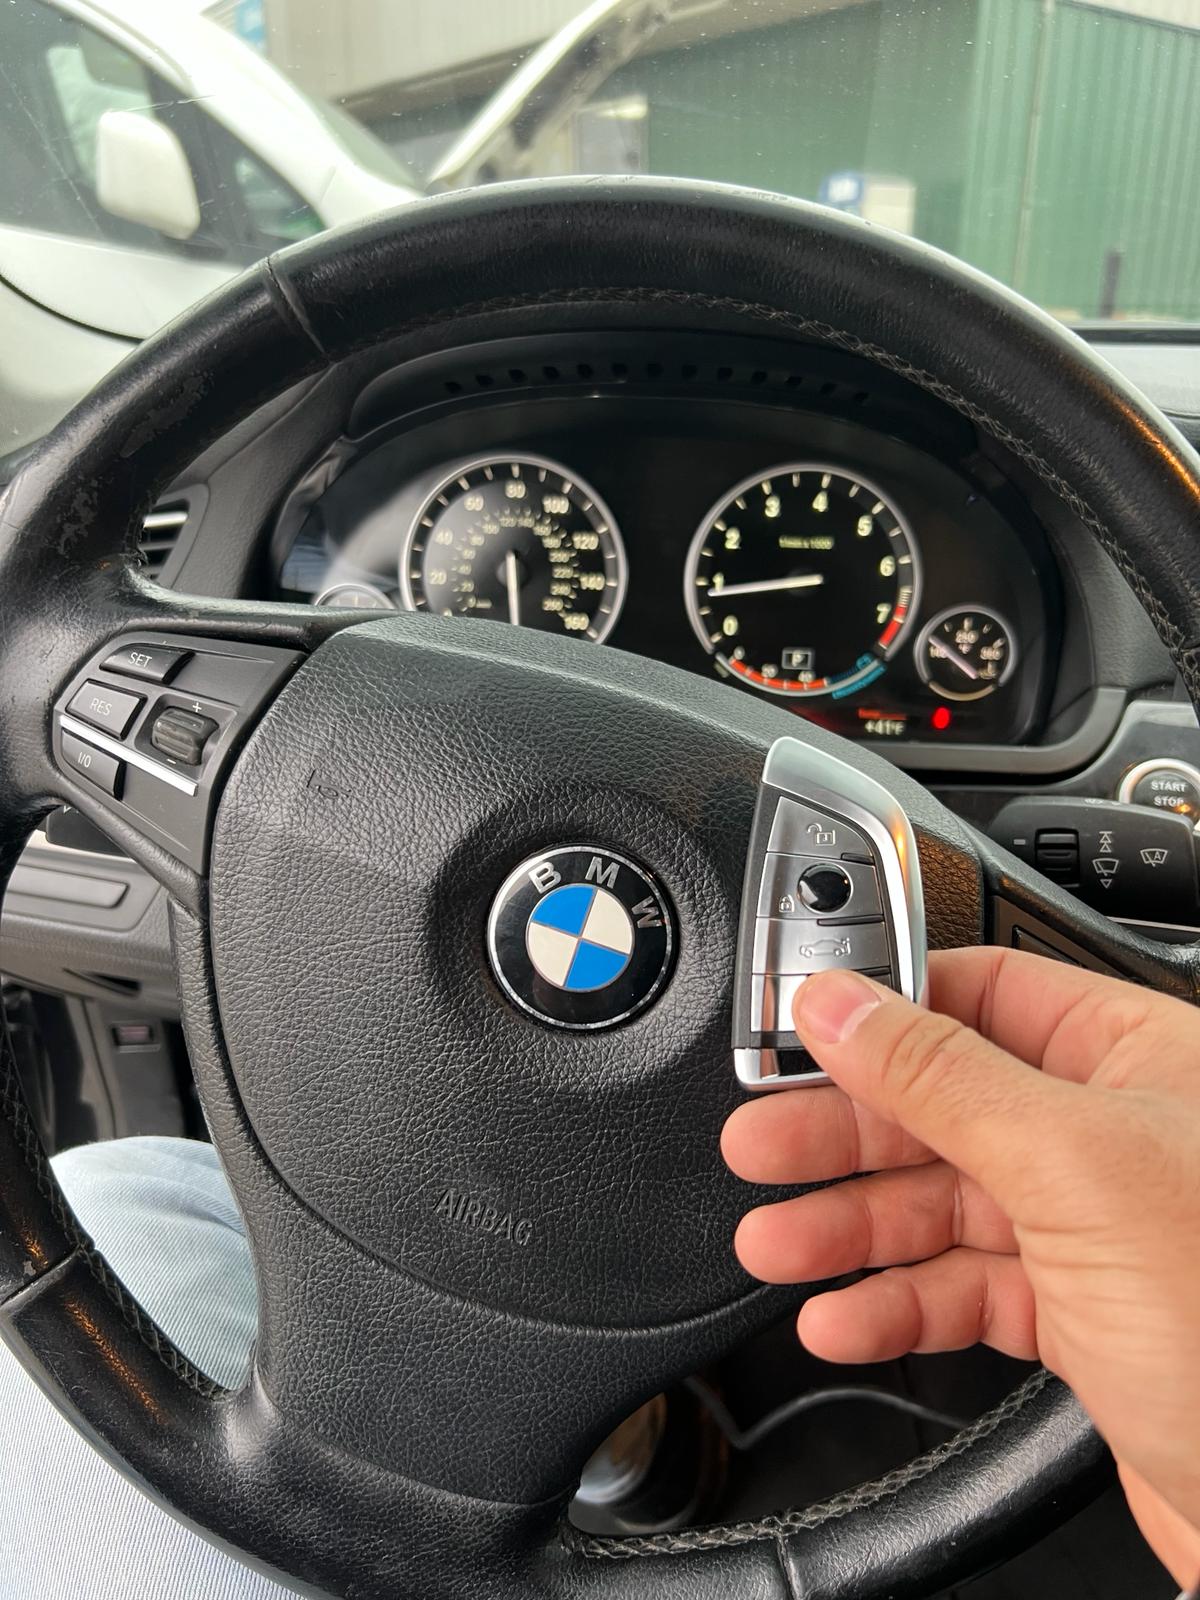 BMW keys replacement Louisville KY (8)